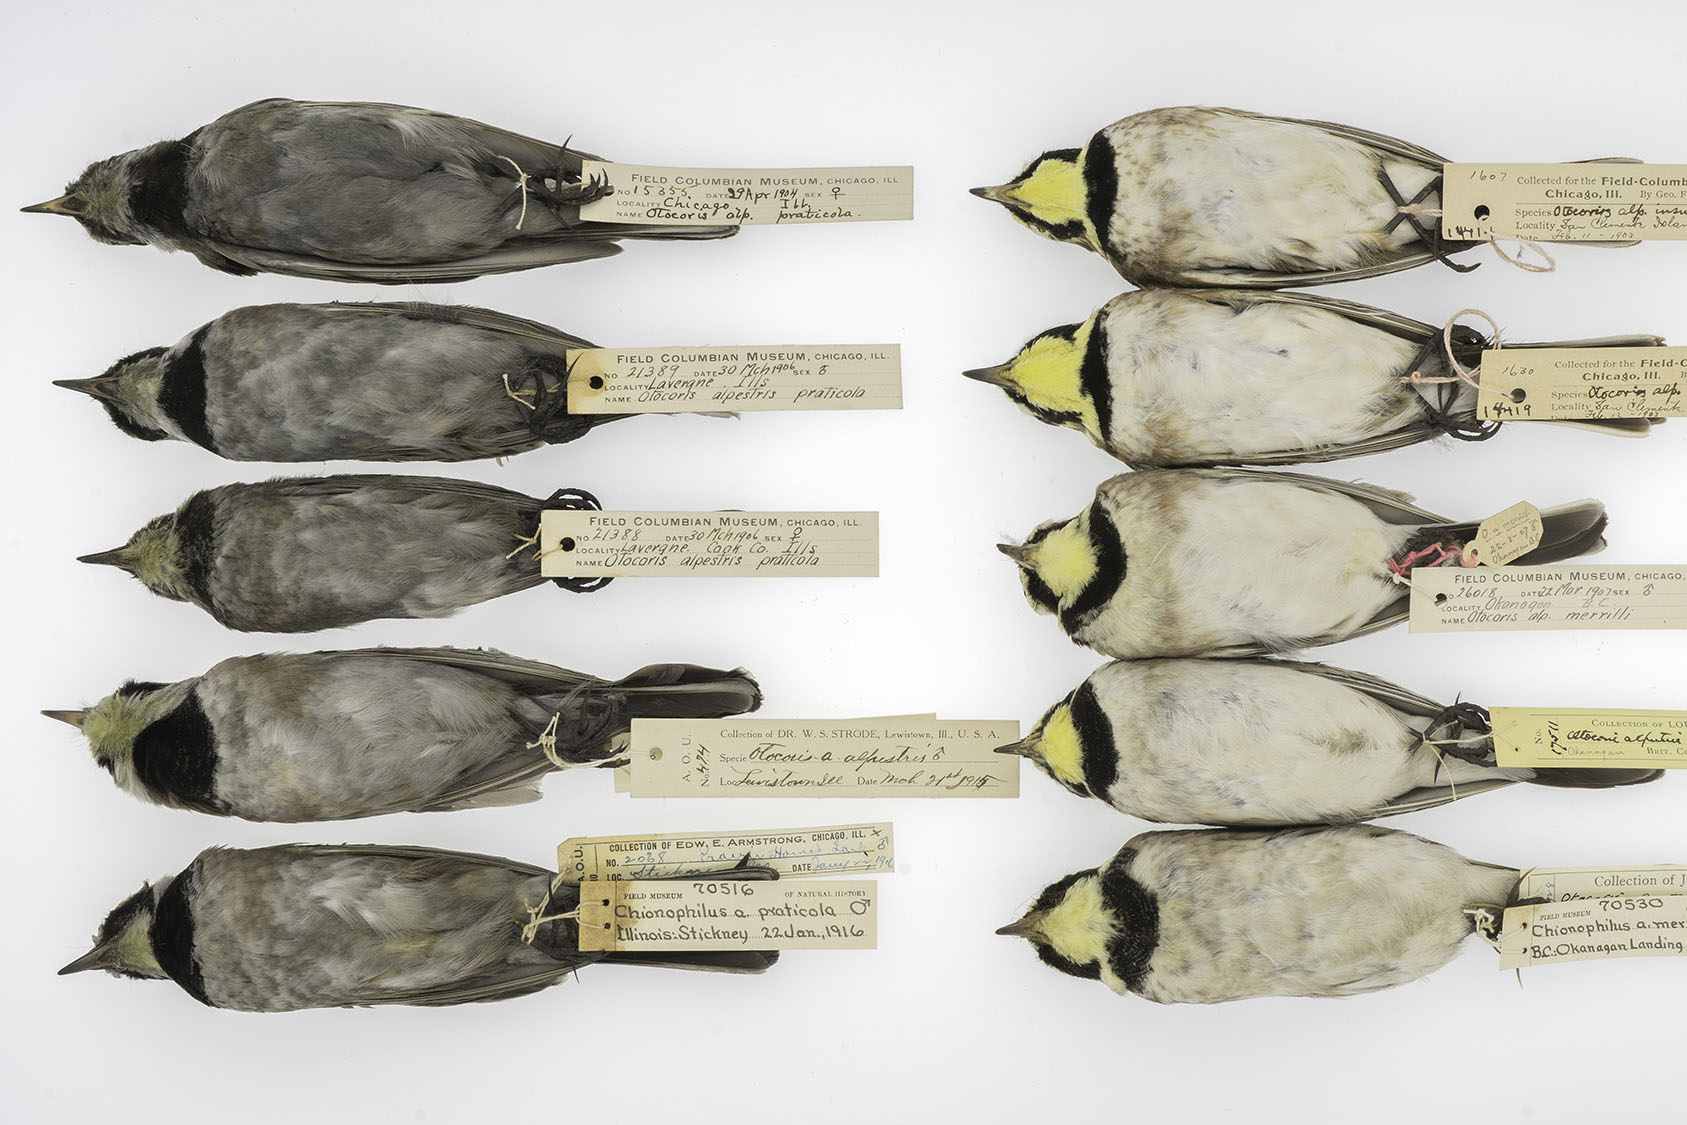 Rows of bird specimens with yellow necks; half have gray stomachs and half have white bellies